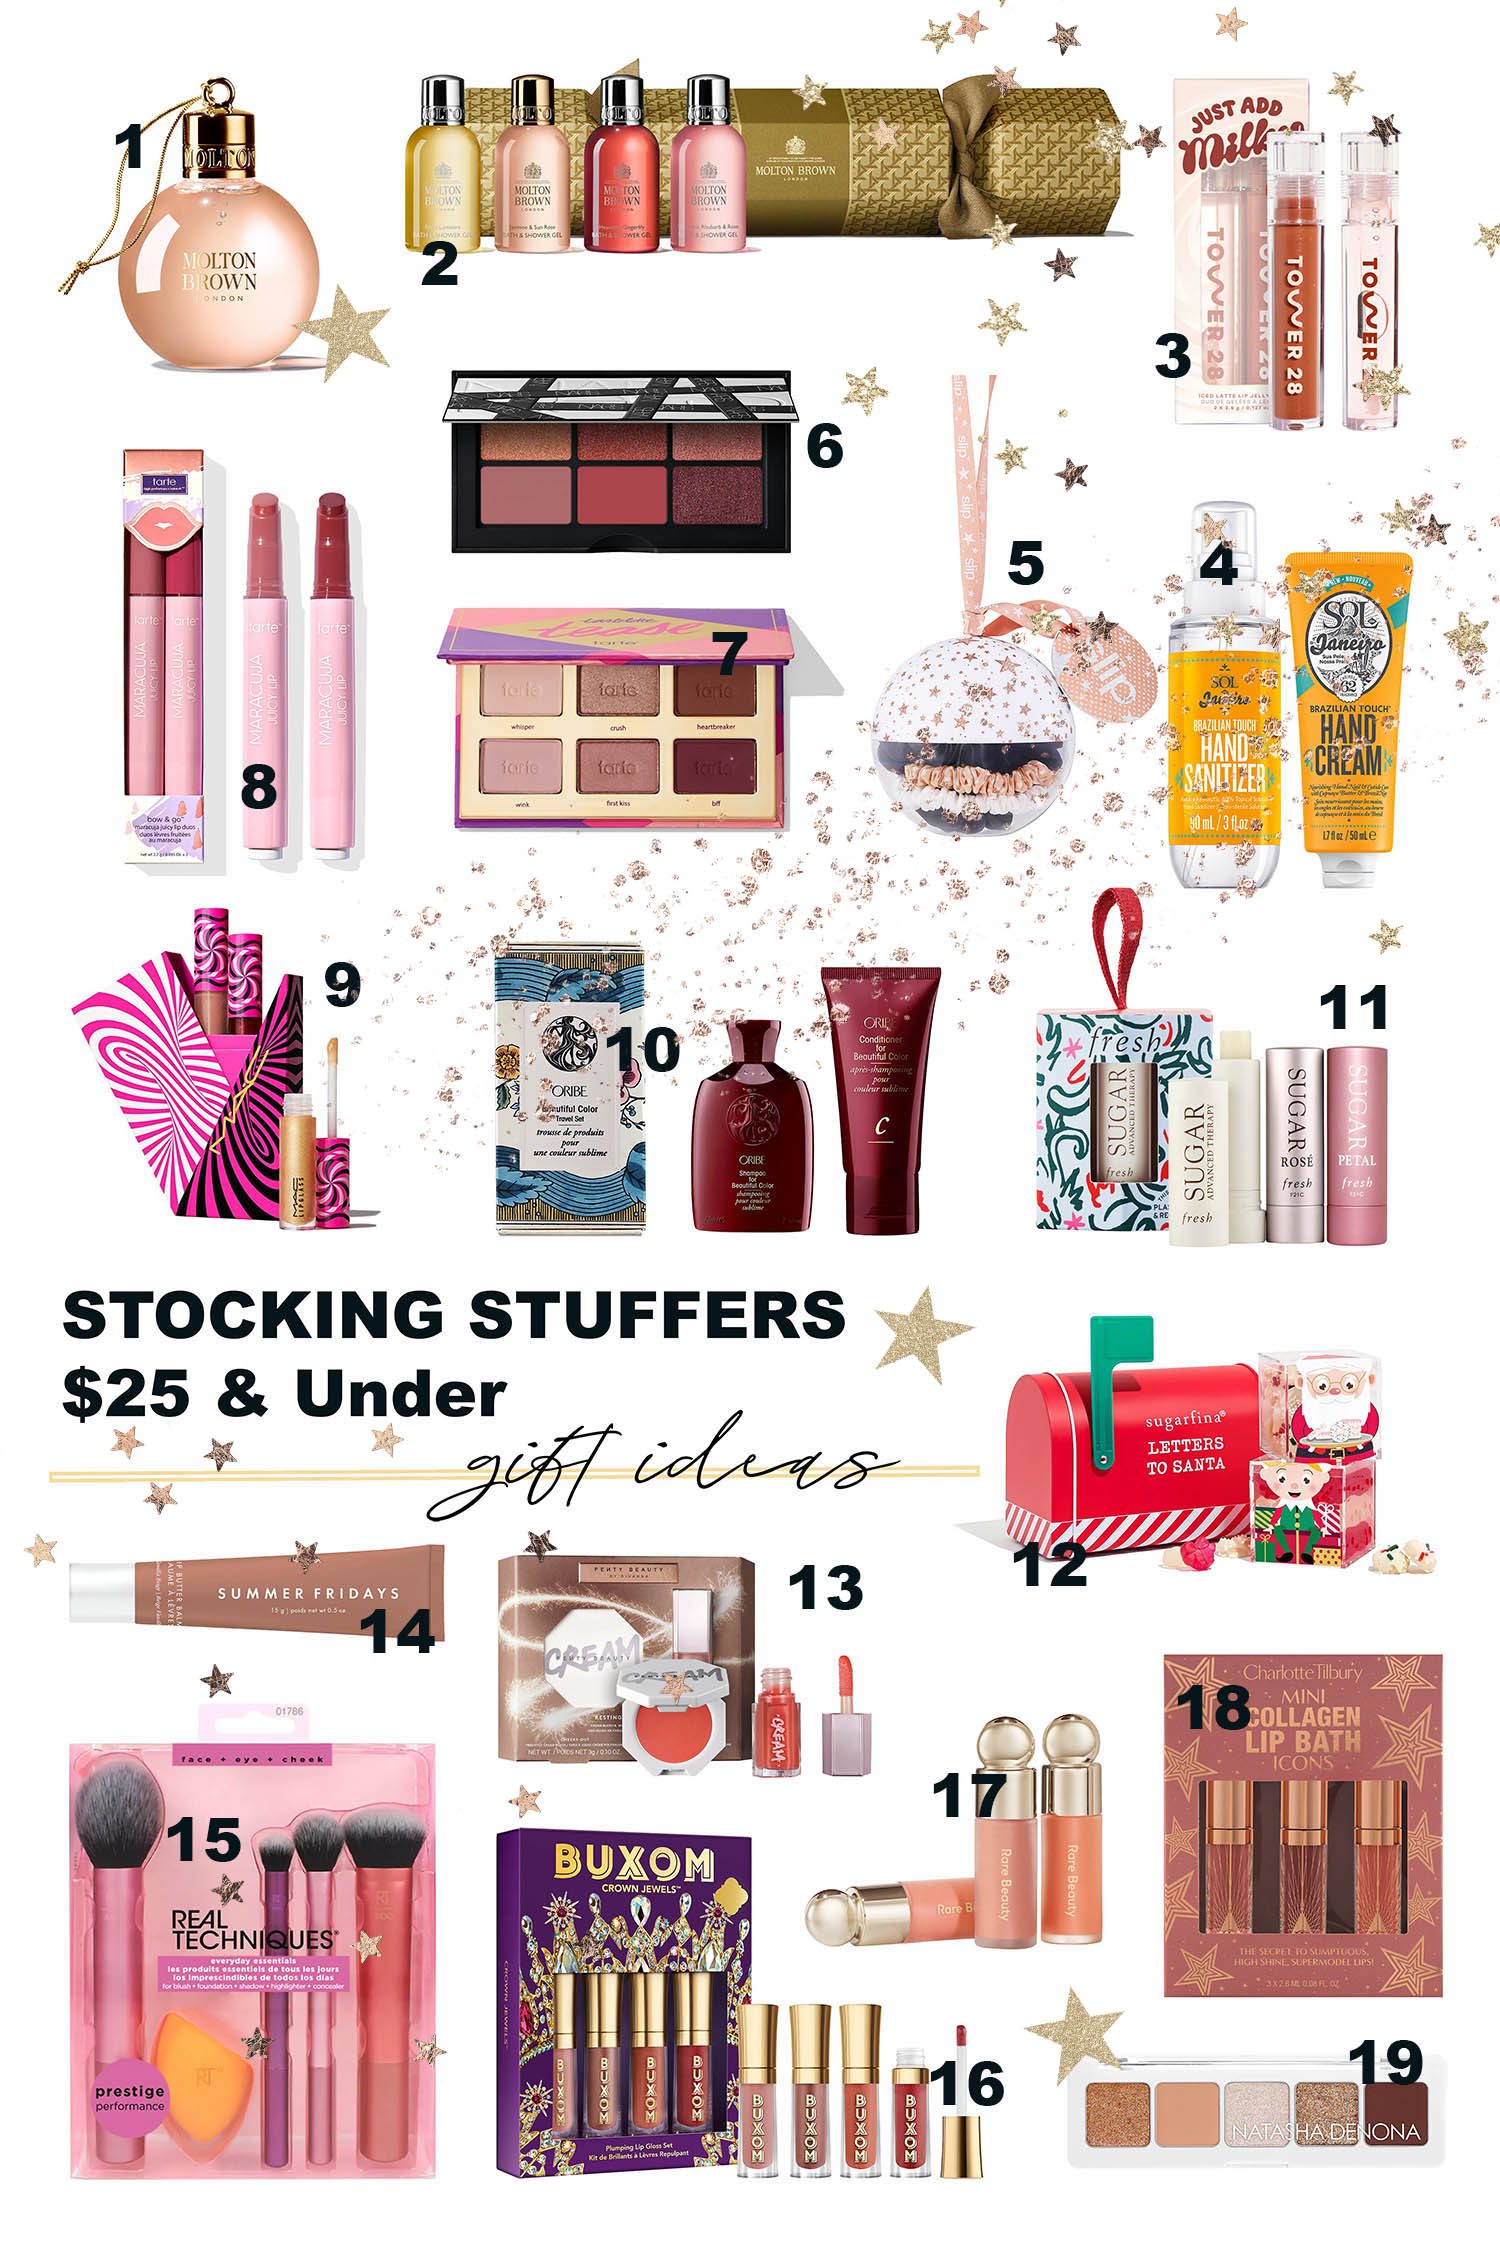 Holiday Gift Guide Archives - Page 4 of 10 - The Beauty Look Book